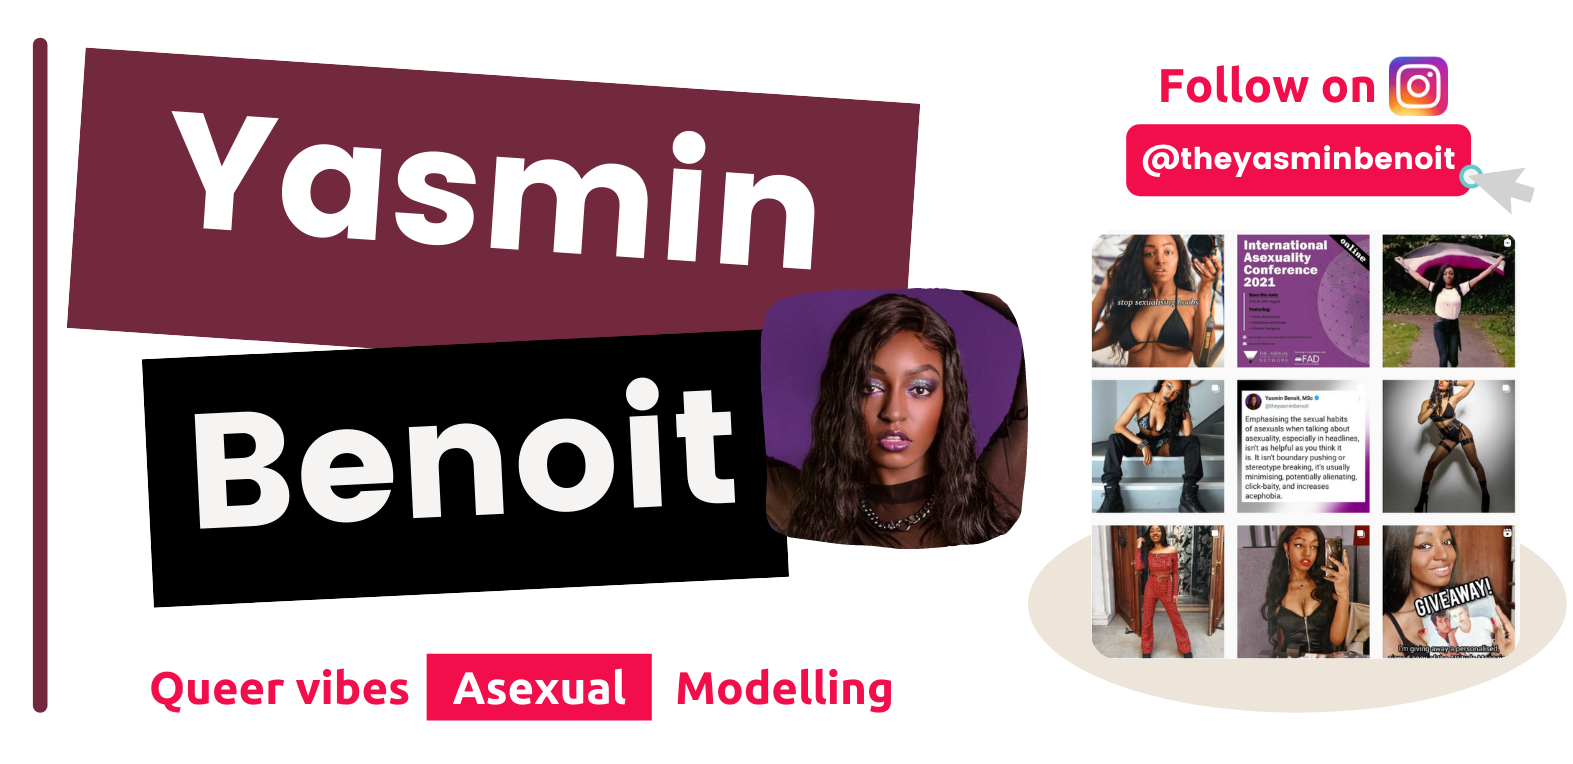 Follow @theyasminbenoit on Instagram for queer vibes, asexual content and modelling